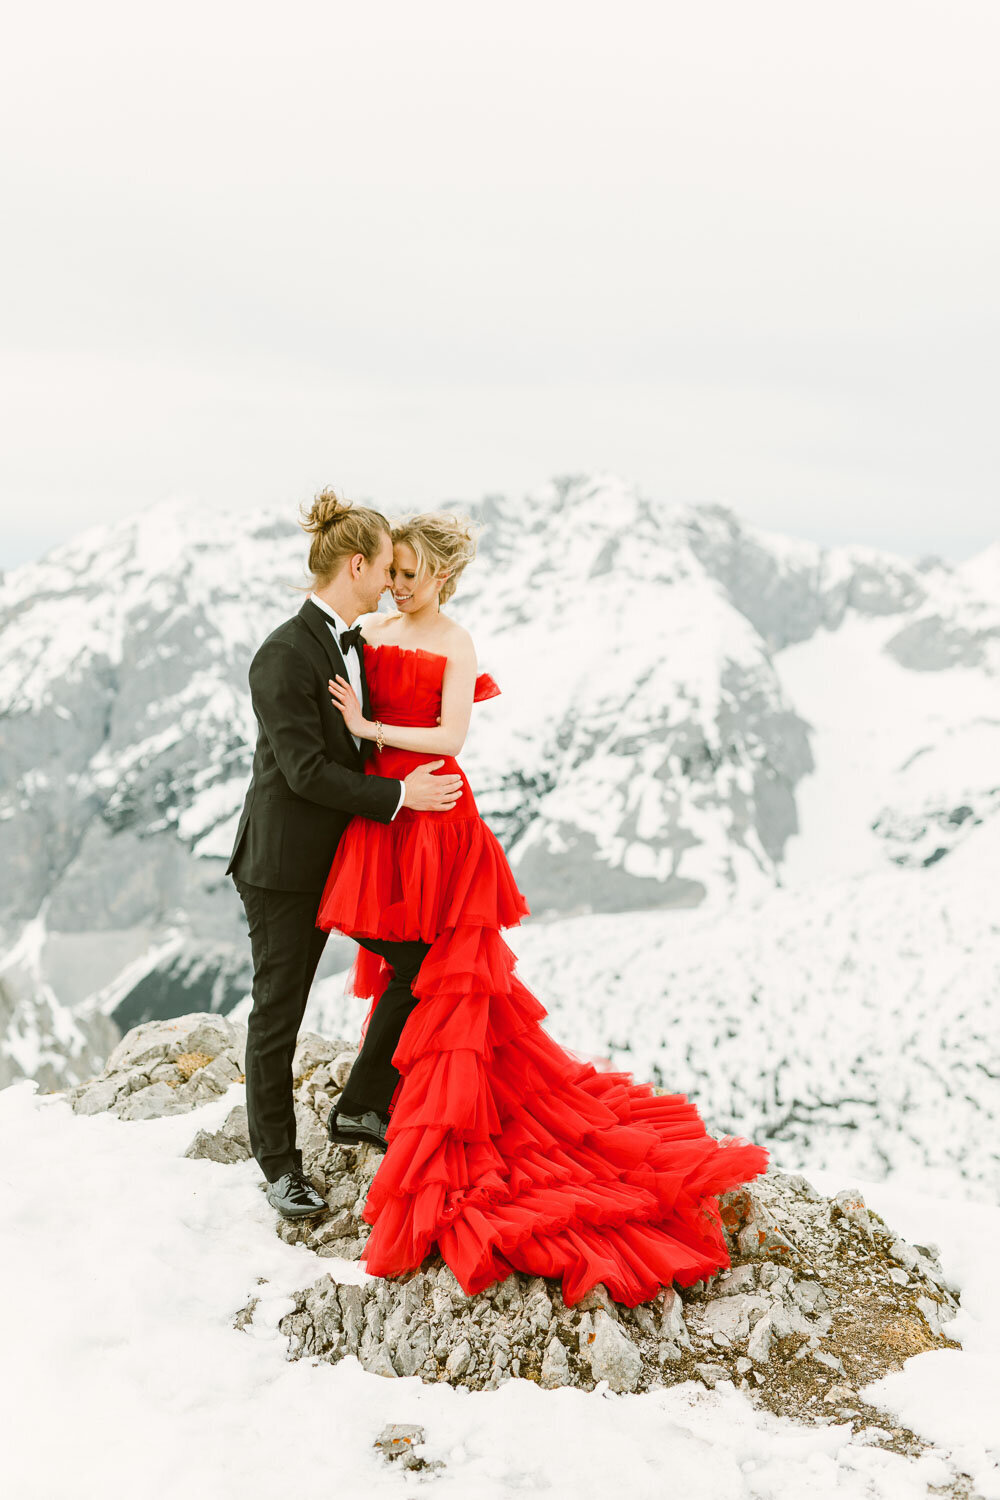 Winter portrait of an engaged couple in Tirol